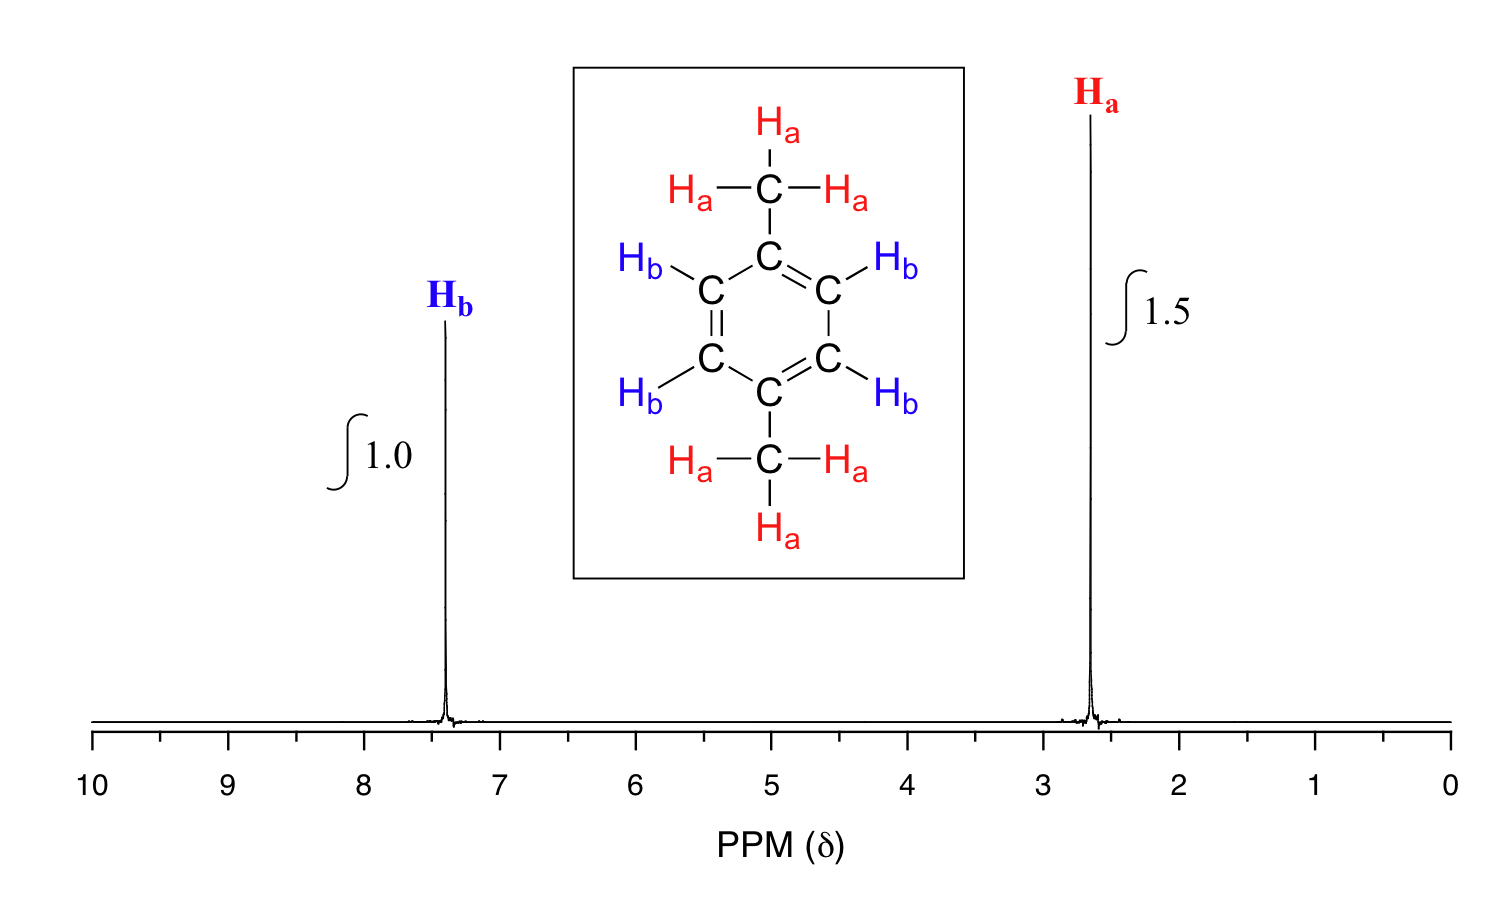 The NMR spectrum of para-xylene (IUPAC name 1,4-dimethylbenzene). Ha (hydrogens on methyl groups attached to aromatic ring) about 2.6 ppm with signal integration of 1.5. Hb (hydrogens on aromatic ring) about 7.5 ppm with signal integration of 1.0